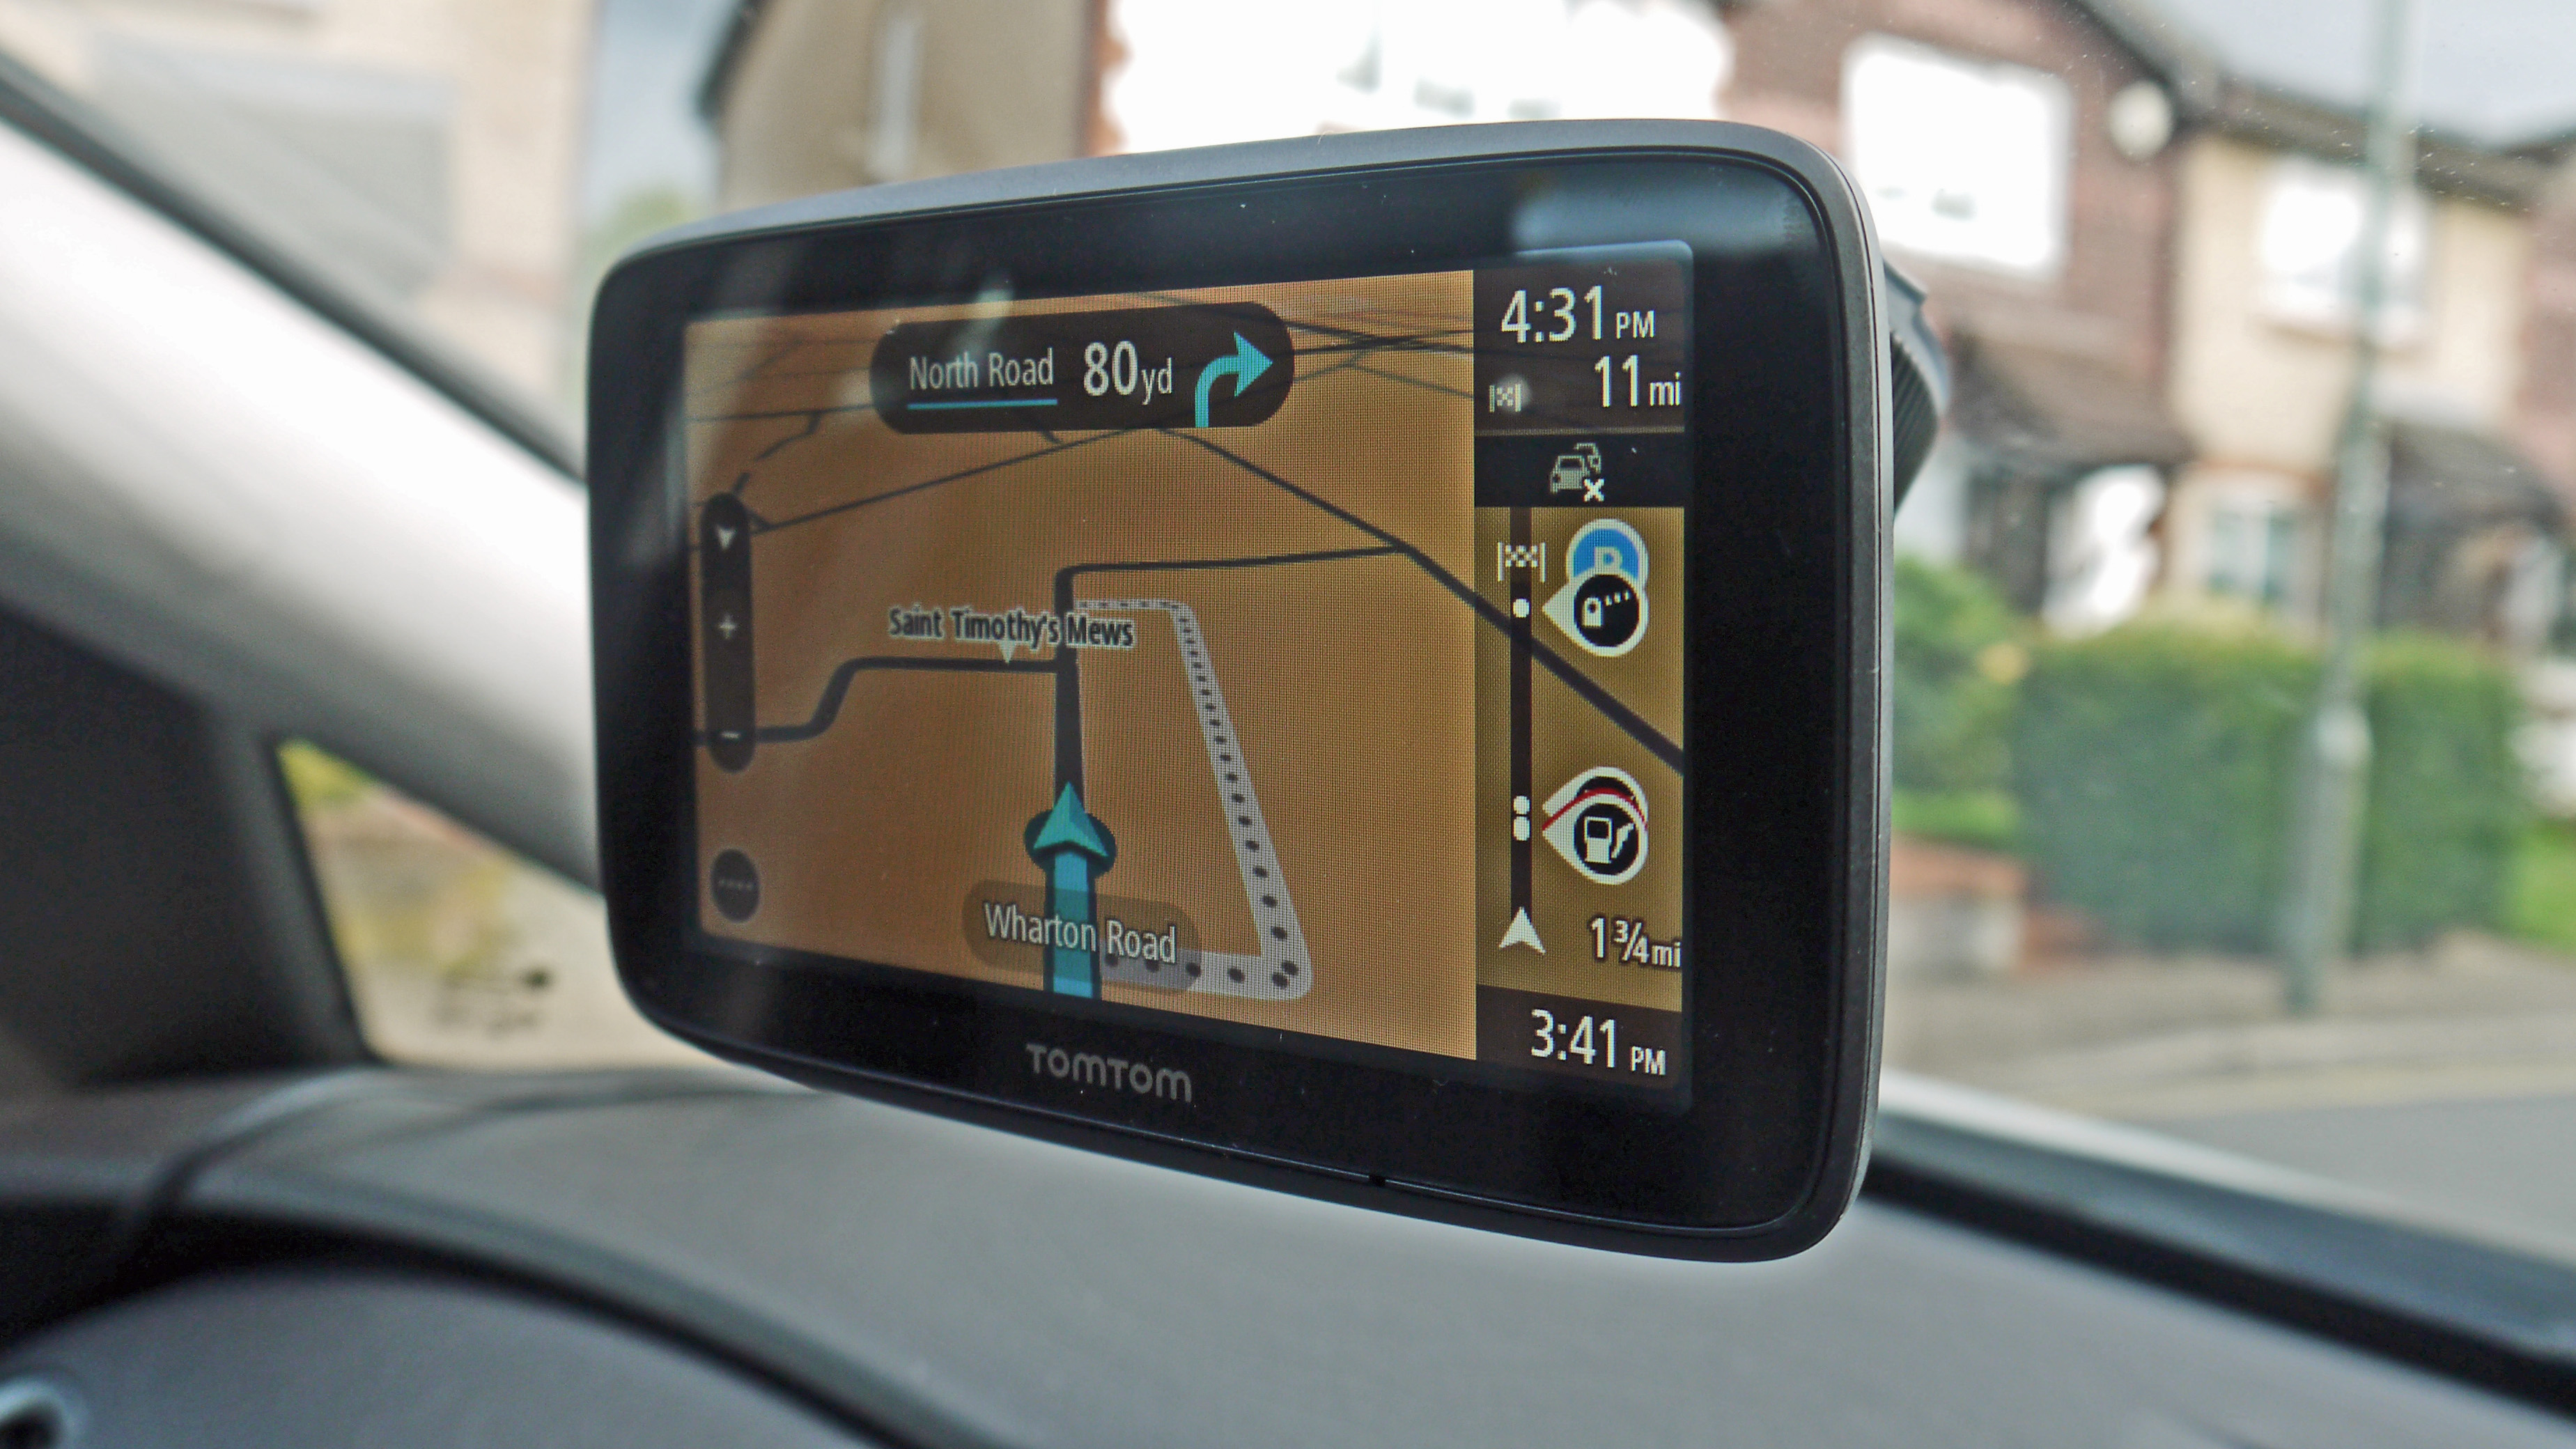 TomTom Car Sat Nav GO 520 Capacitive Screen Lifetime Traffic via Smartphone and World Maps Google Now Siri Updates via WiFi Smartphone Messages 5 Inch with Handsfree Calling 